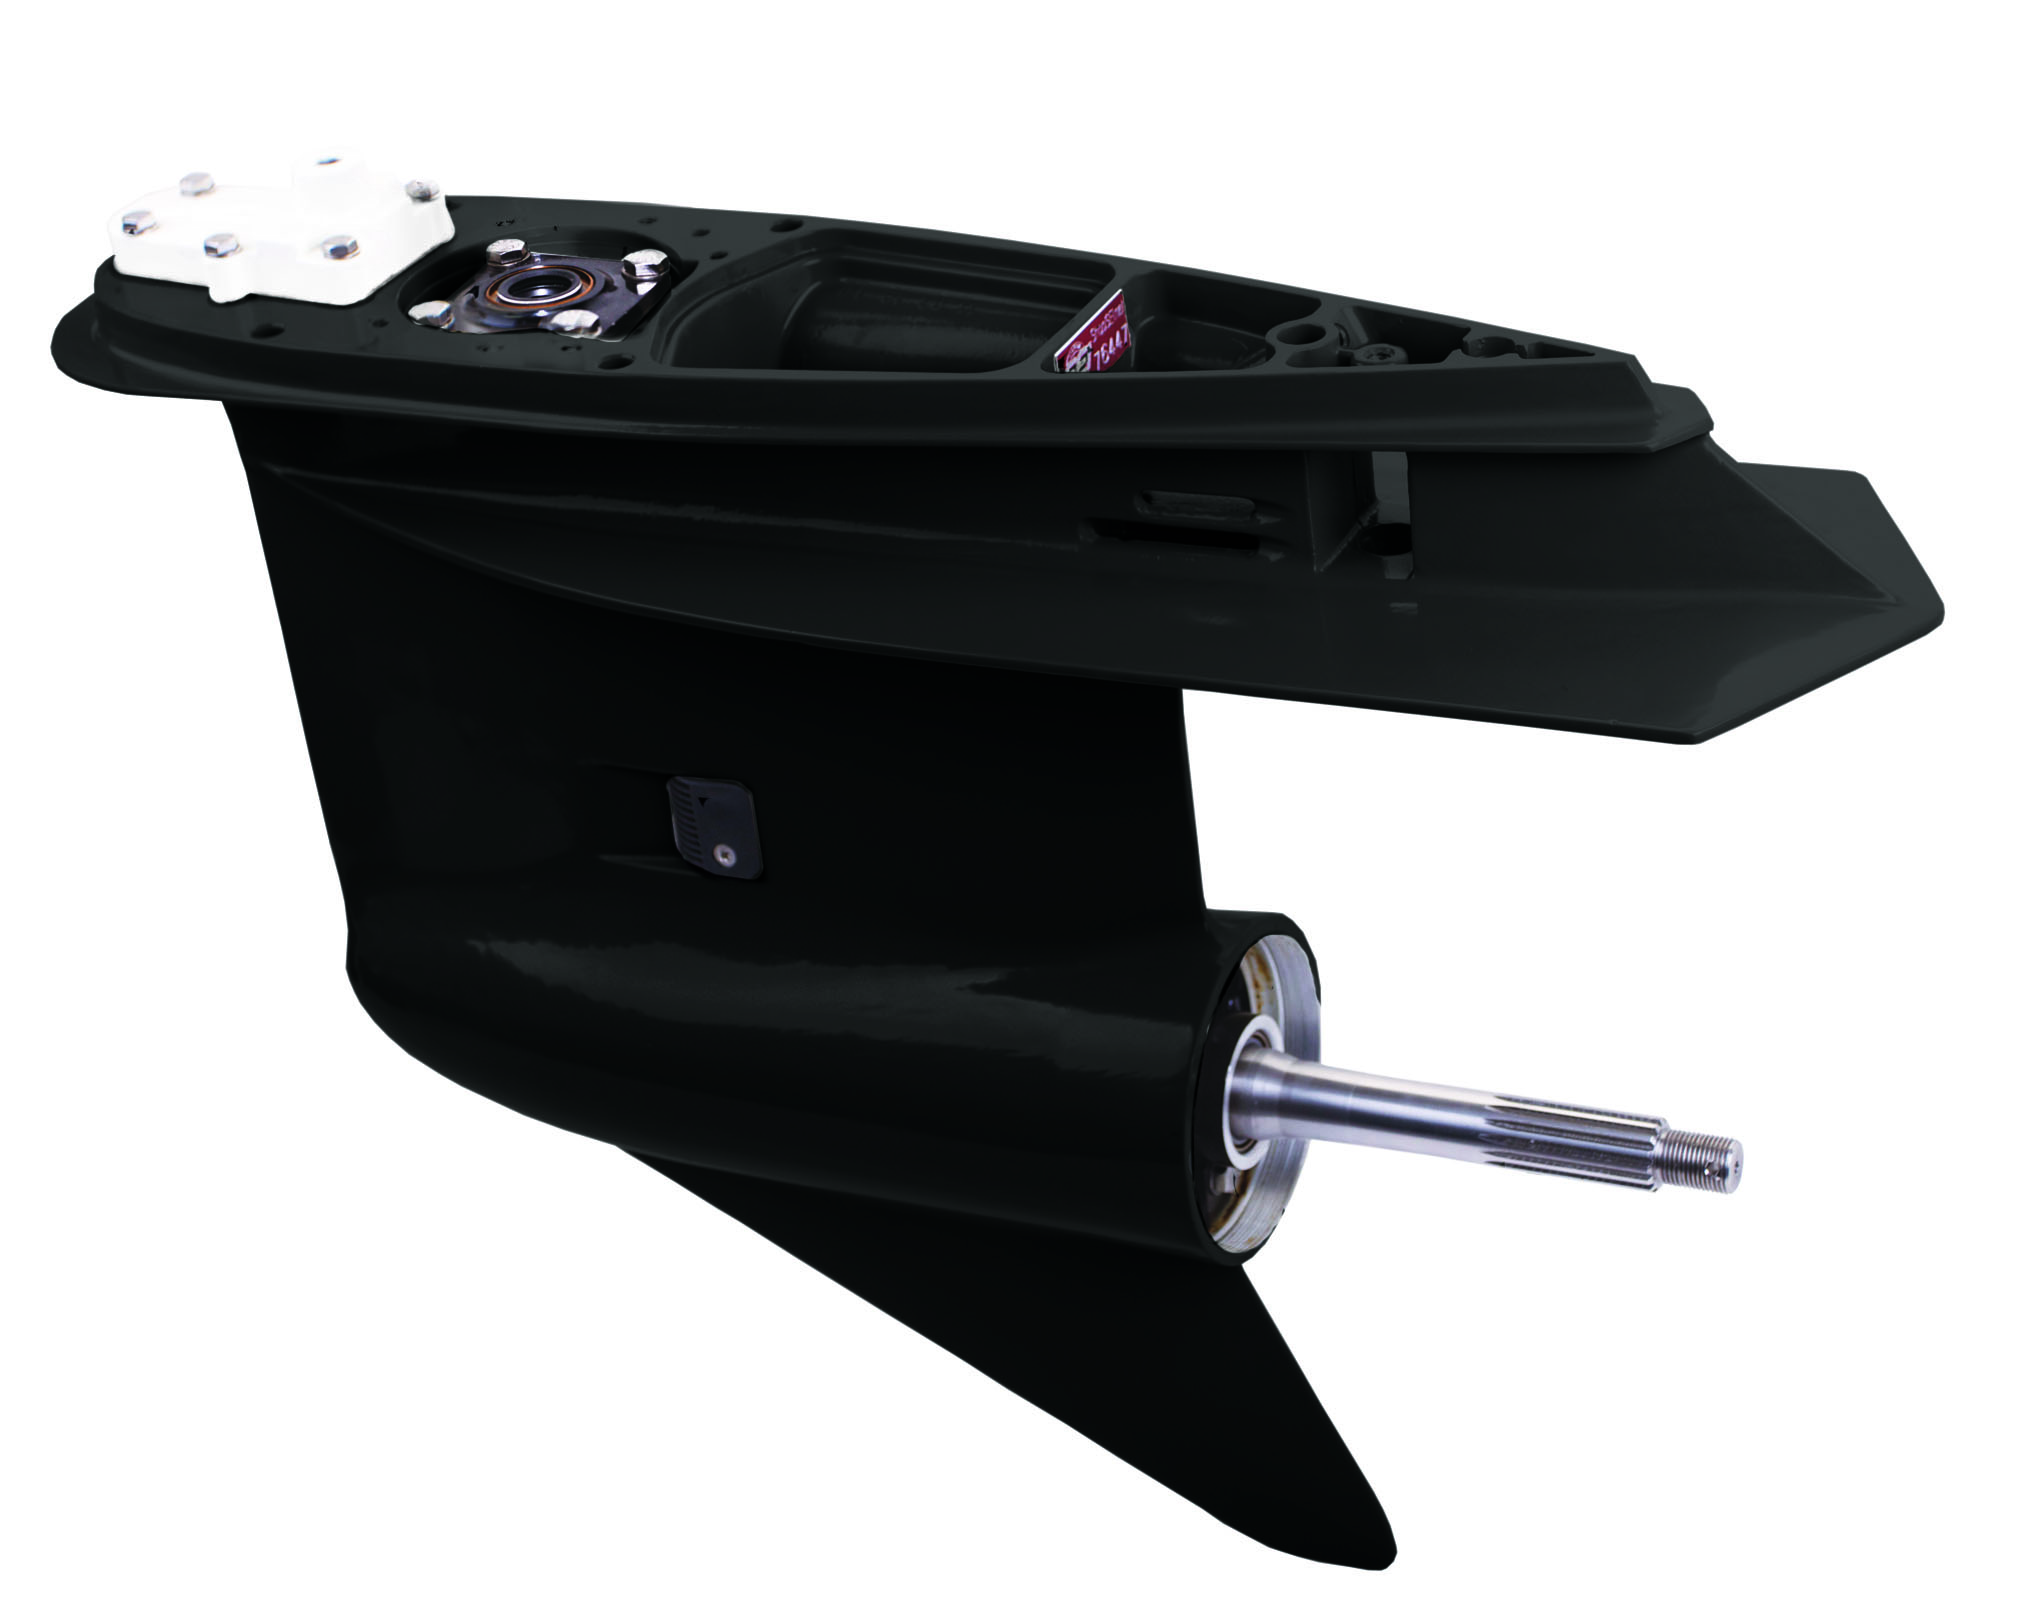 For Johnson / Evinrude Complete Lower Unit Applications